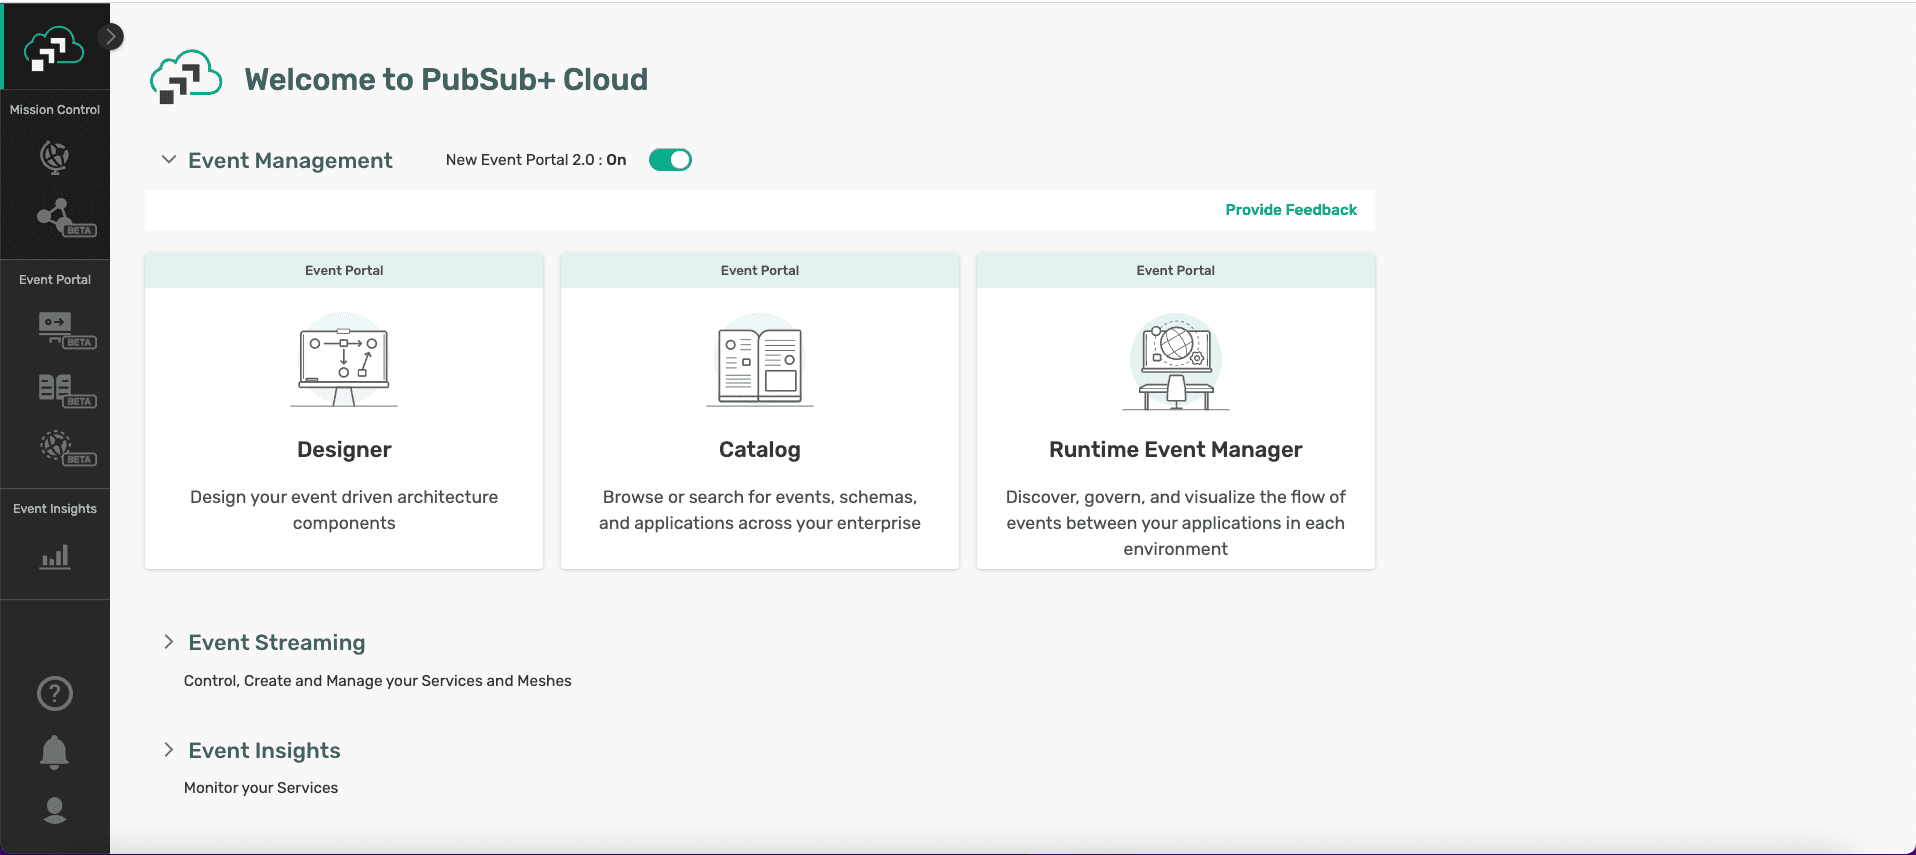 The home screen of PubSub+ Cloud showing PubSub+ Event Portal Designer, Catalog, and Runtime Event Manager.